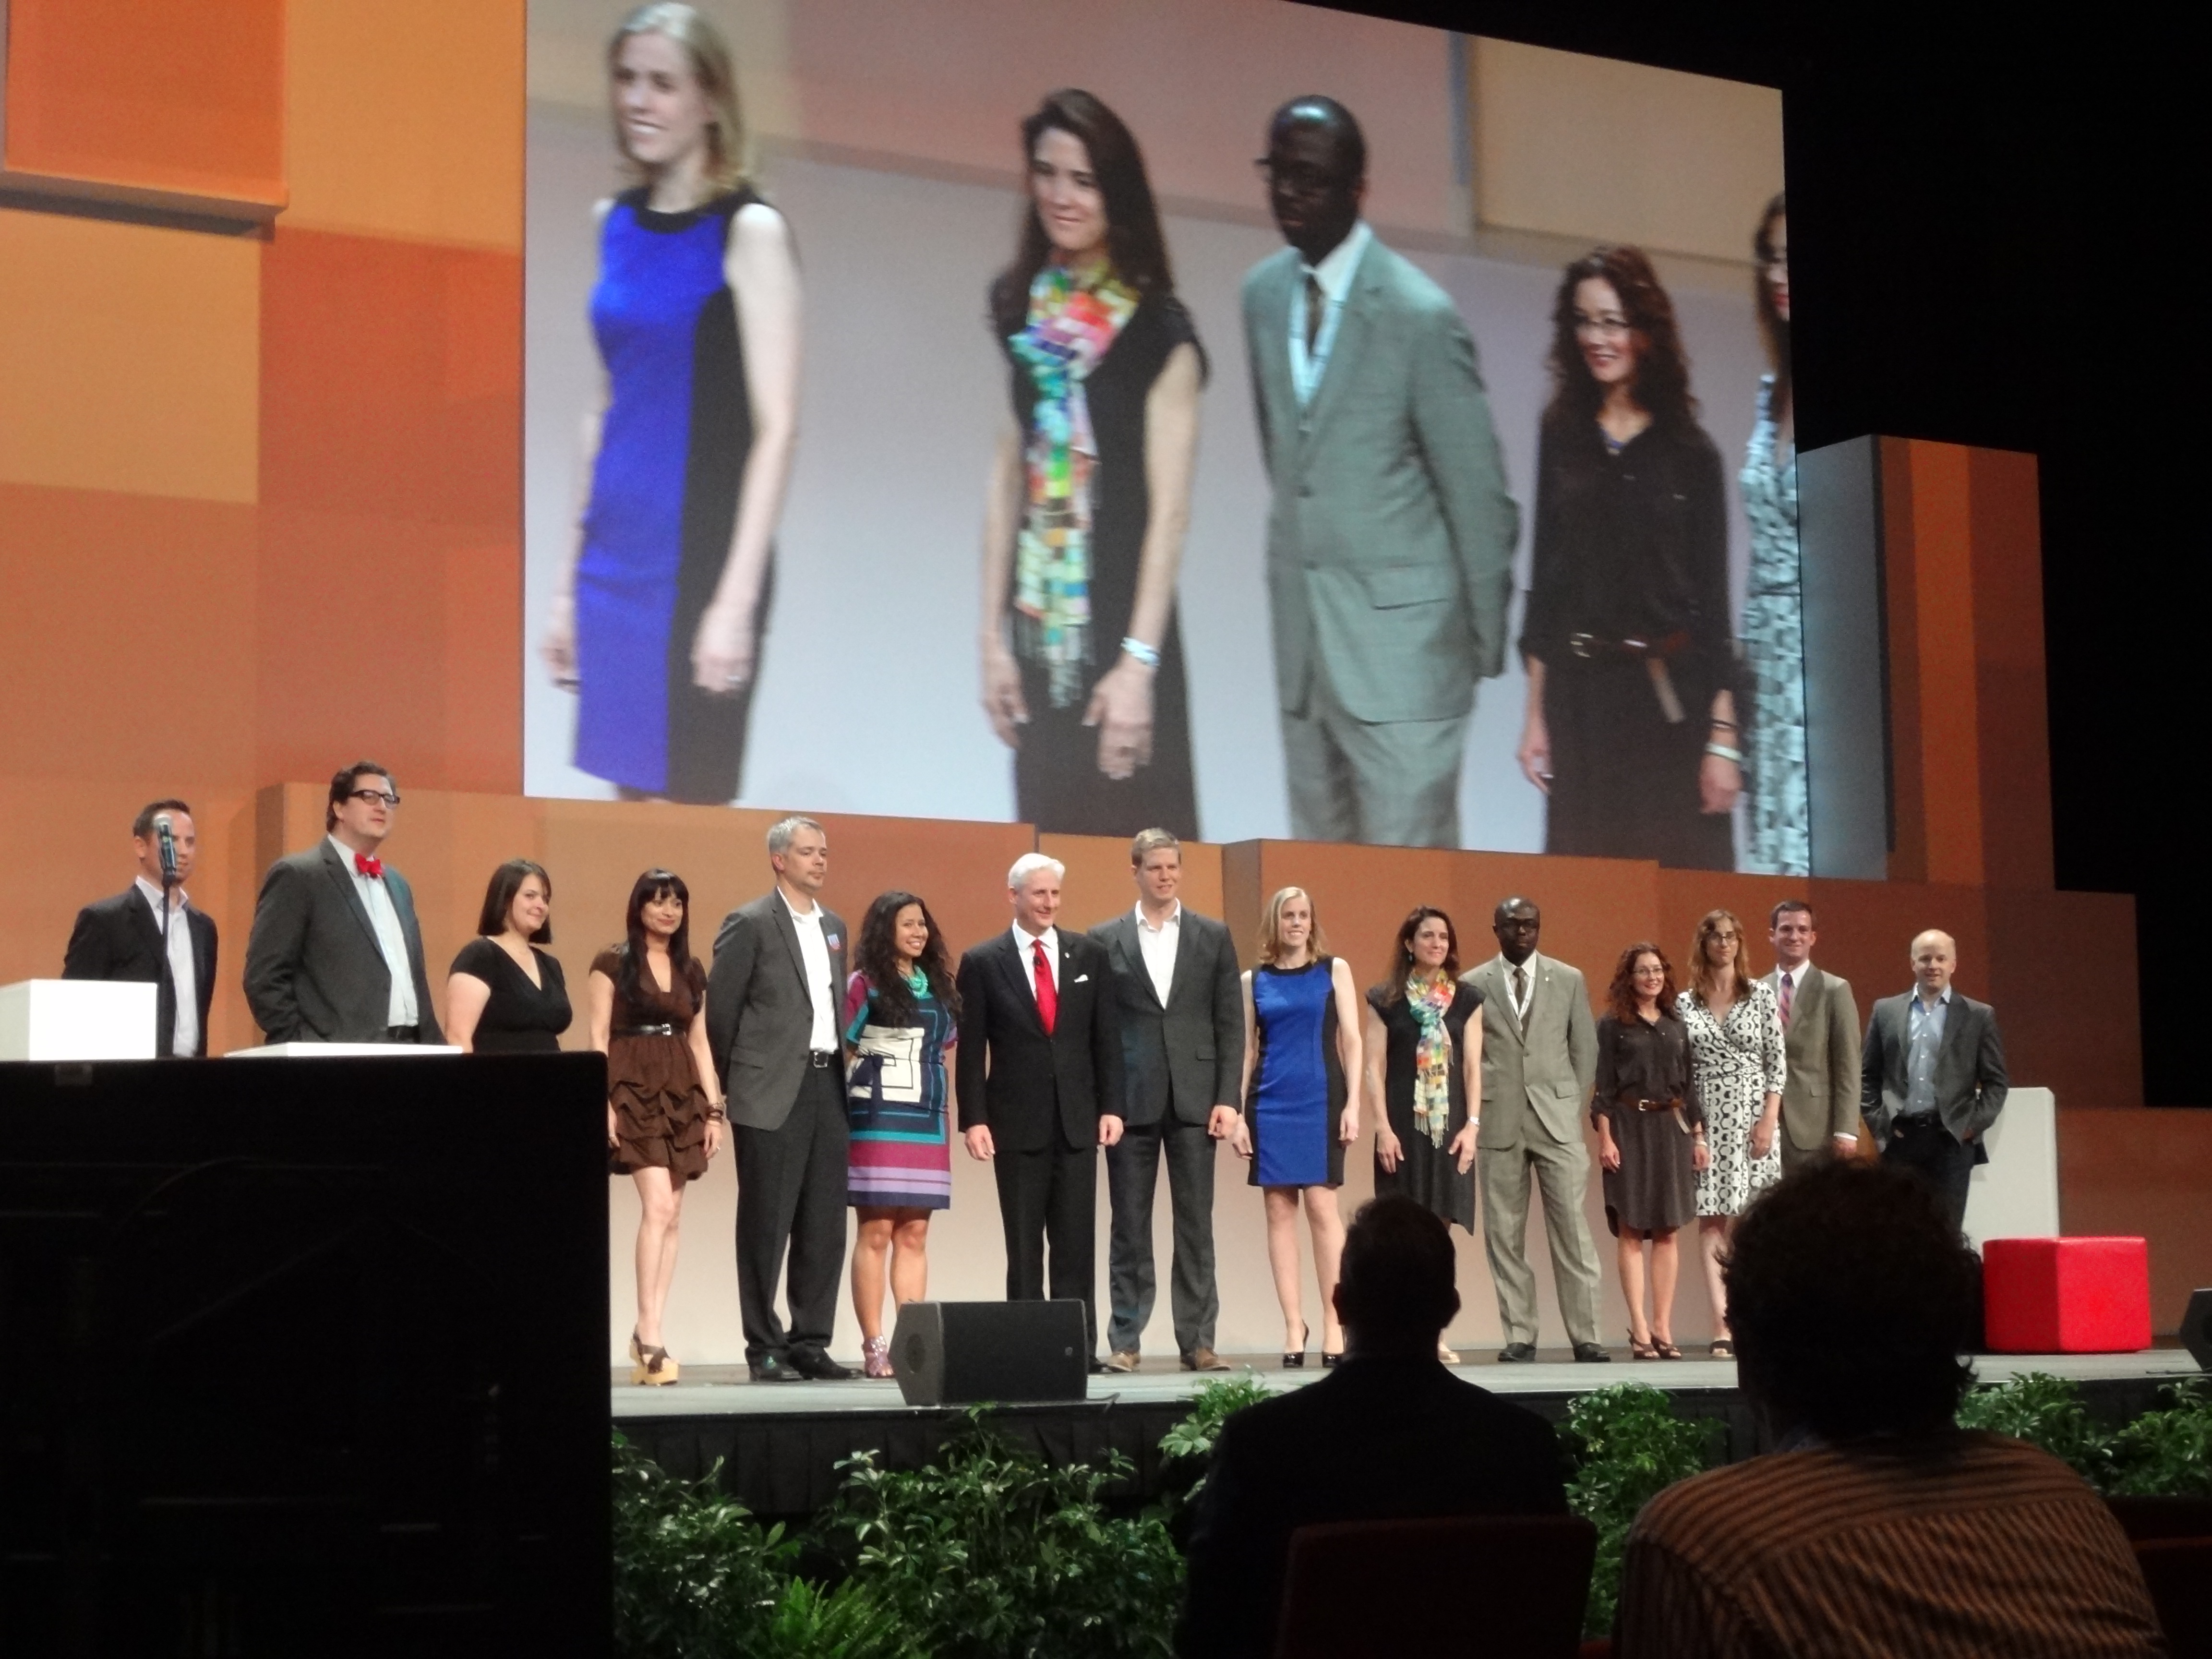 2013 AIA Convention Special: New Yorkers Shine as the AIA Honors Design Excellence and Public Service